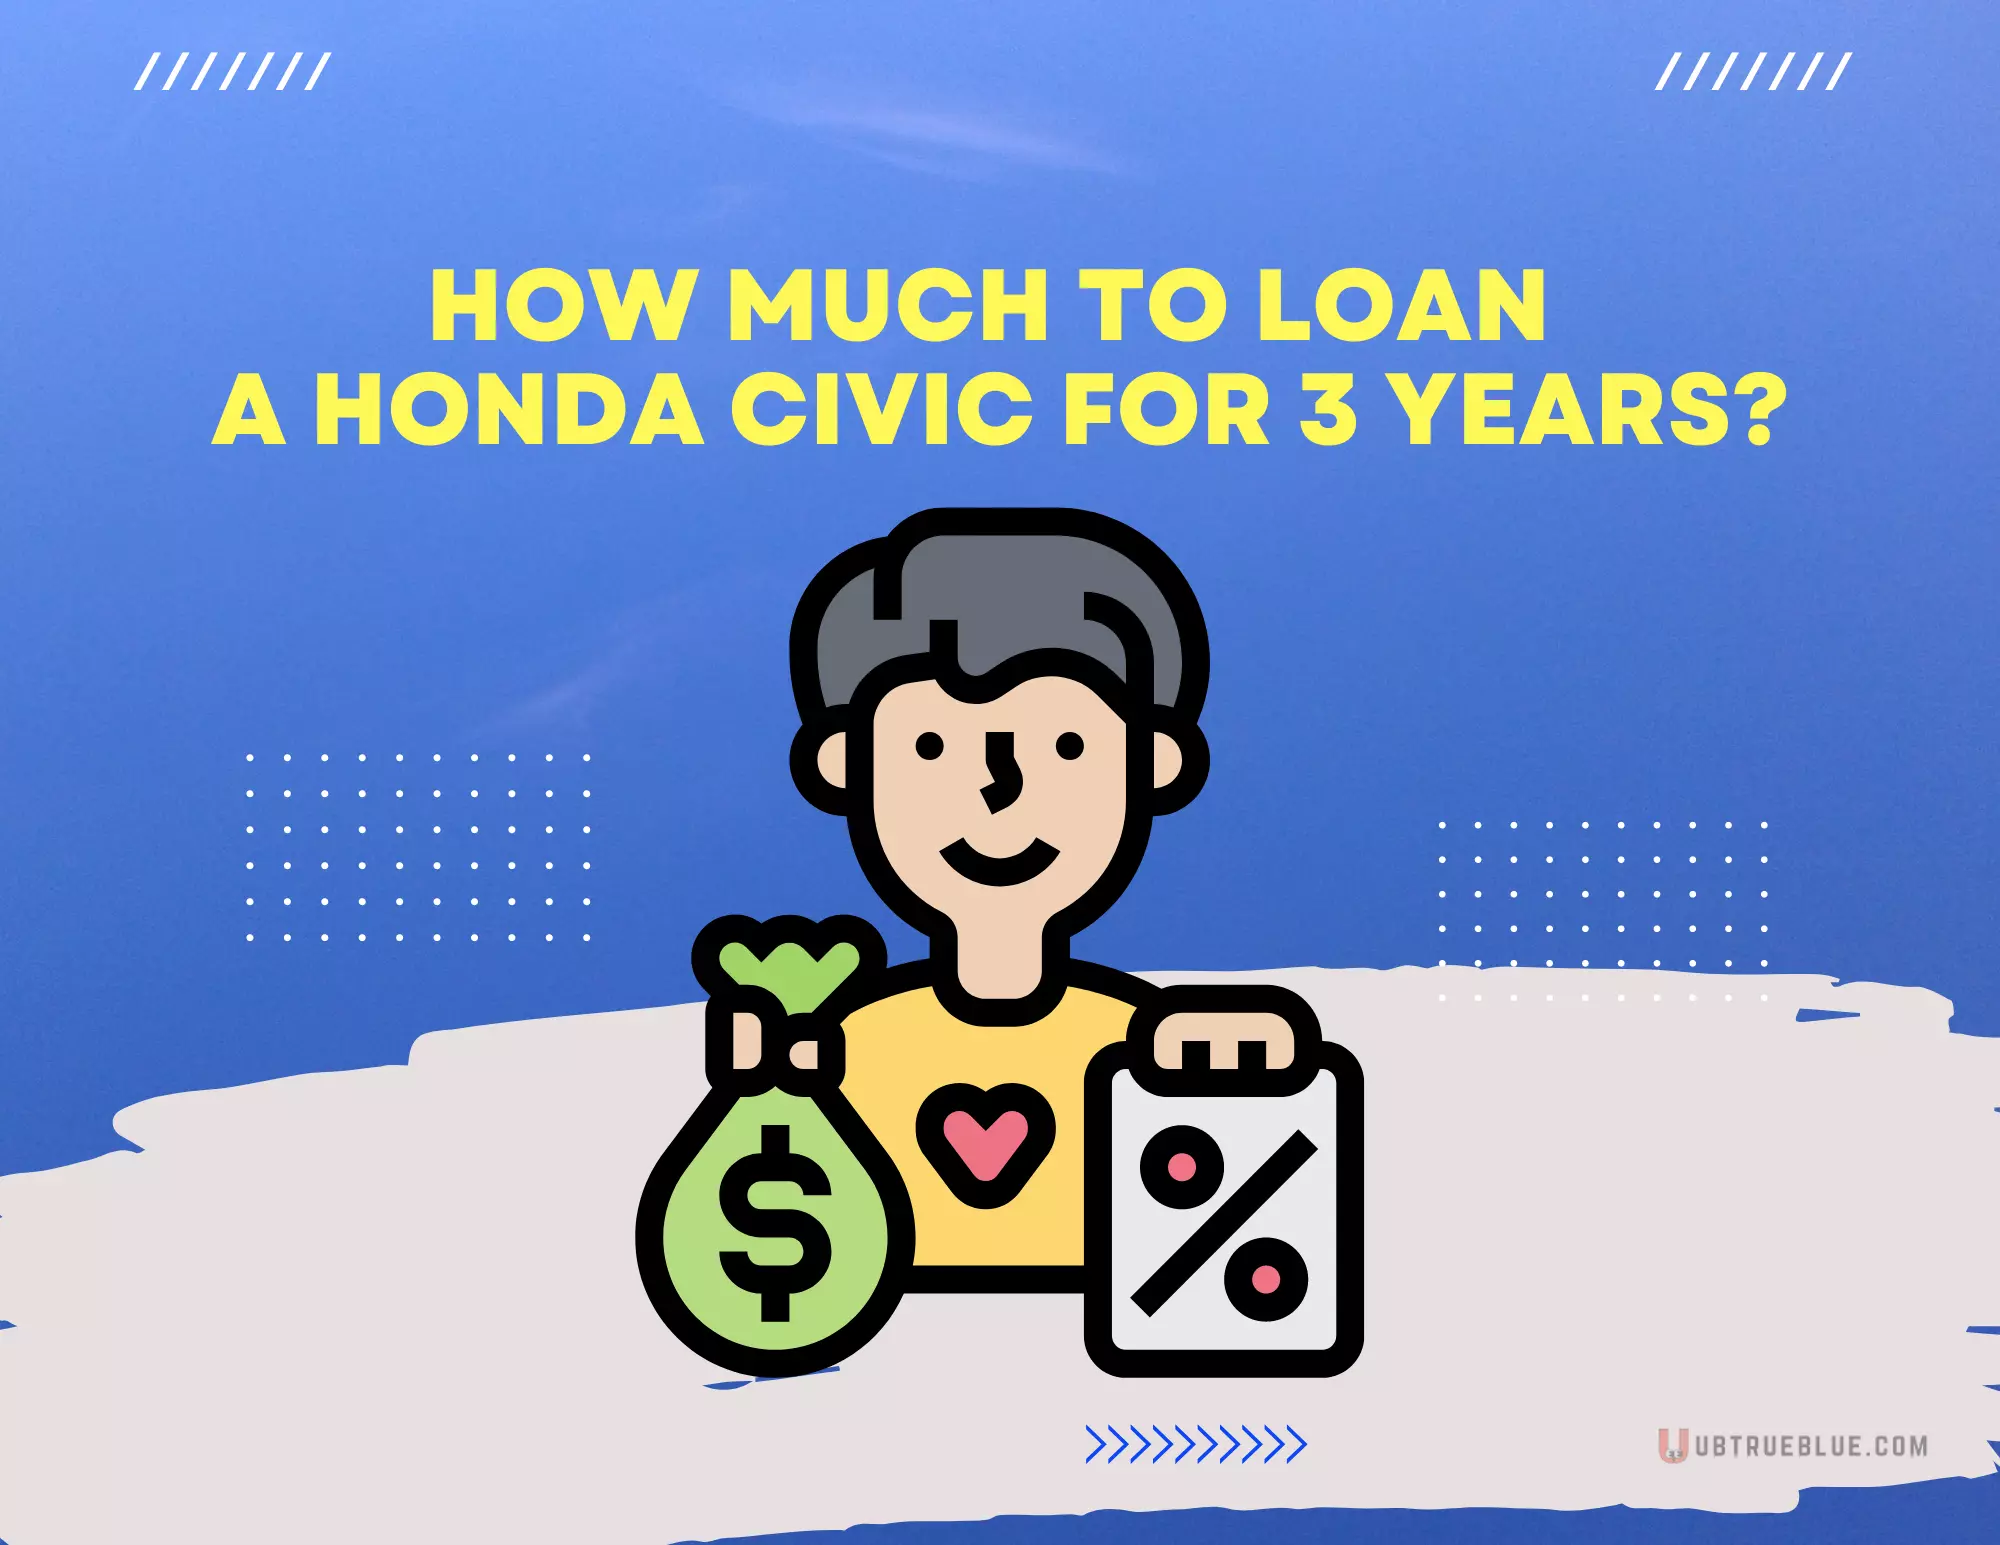 Honda Civic 3 Years Loan Ubtrueblue Automotive How Much To A For Years: Understanding Your Auto Financing Options Personal Finance Interest Rates Calculator 3-Year  Full